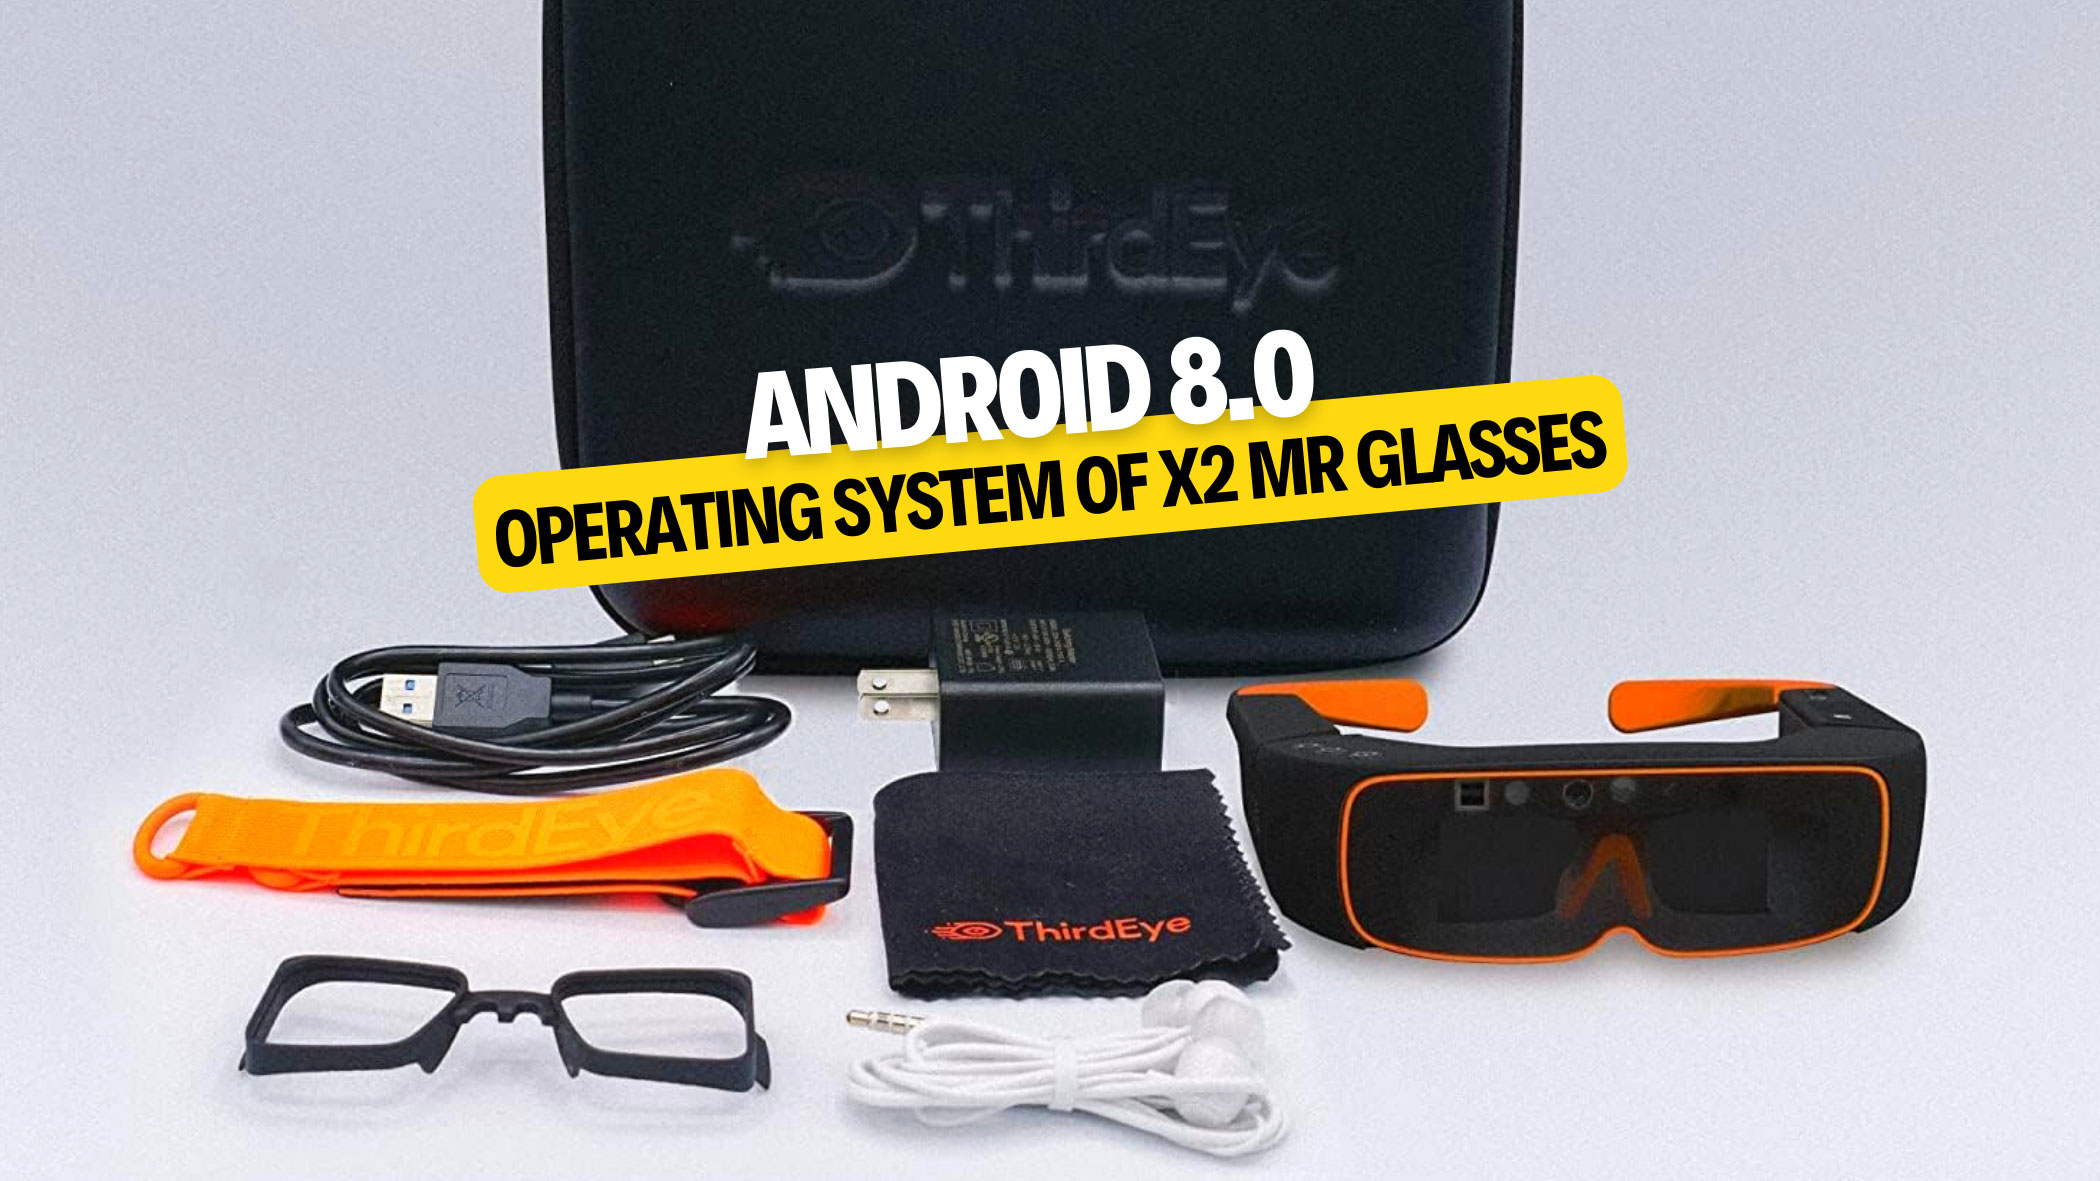 Unleash Customization and Flexibility: Android 8.0 OS and App Compatibility of X2 MR Glasses